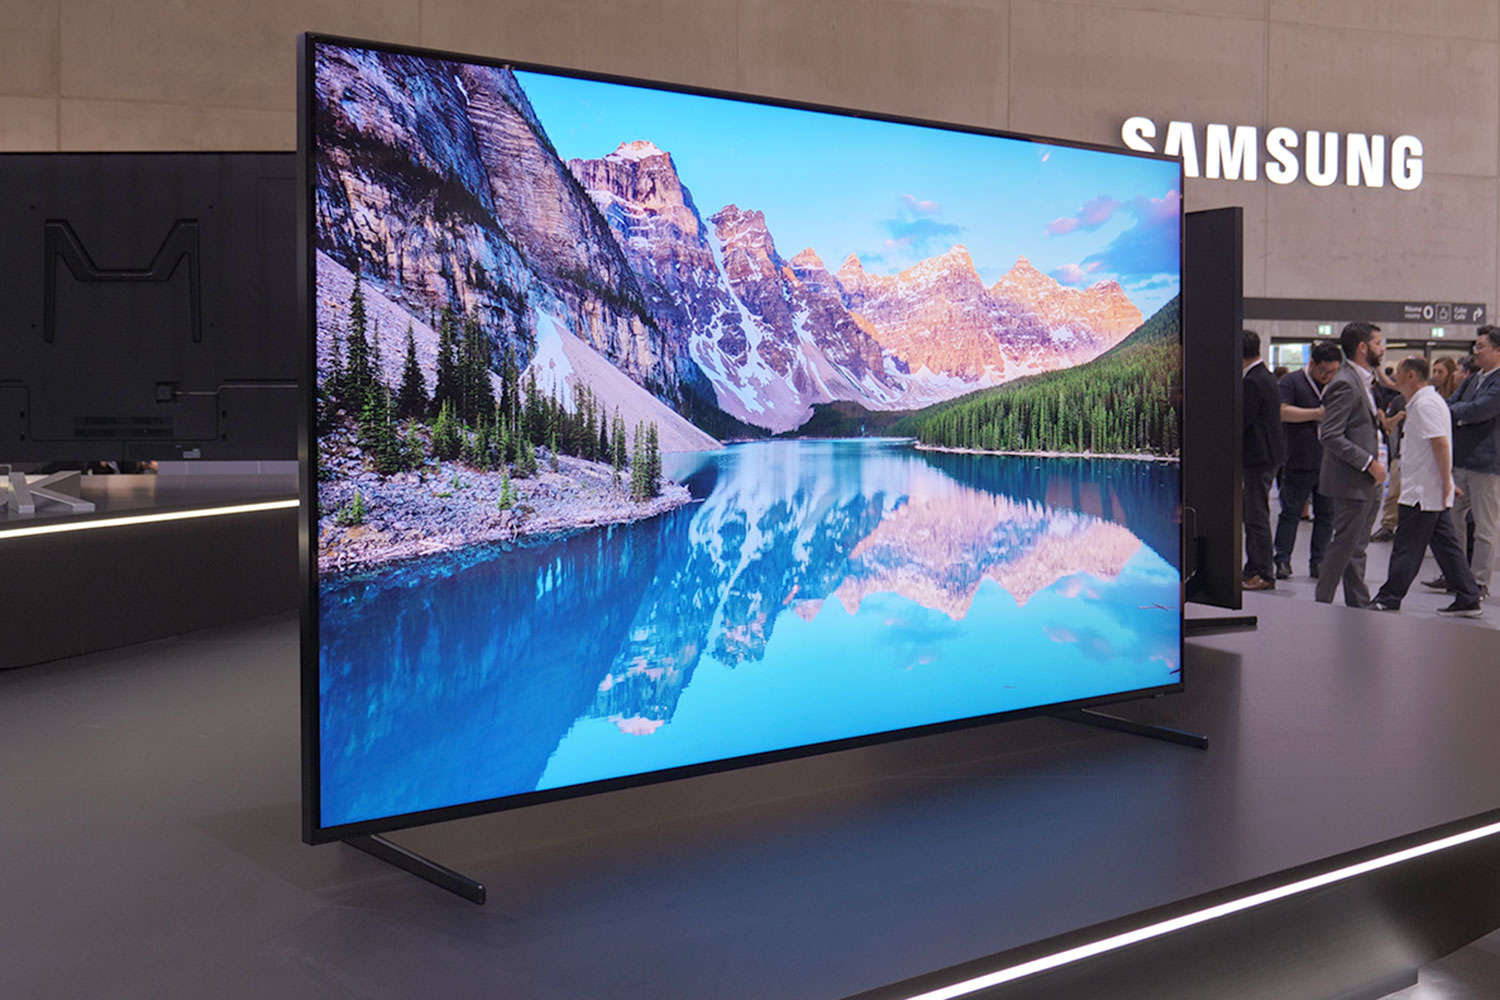 Samsung's 85inch Q900R 8K QLED Now Available for PreOrder Digital